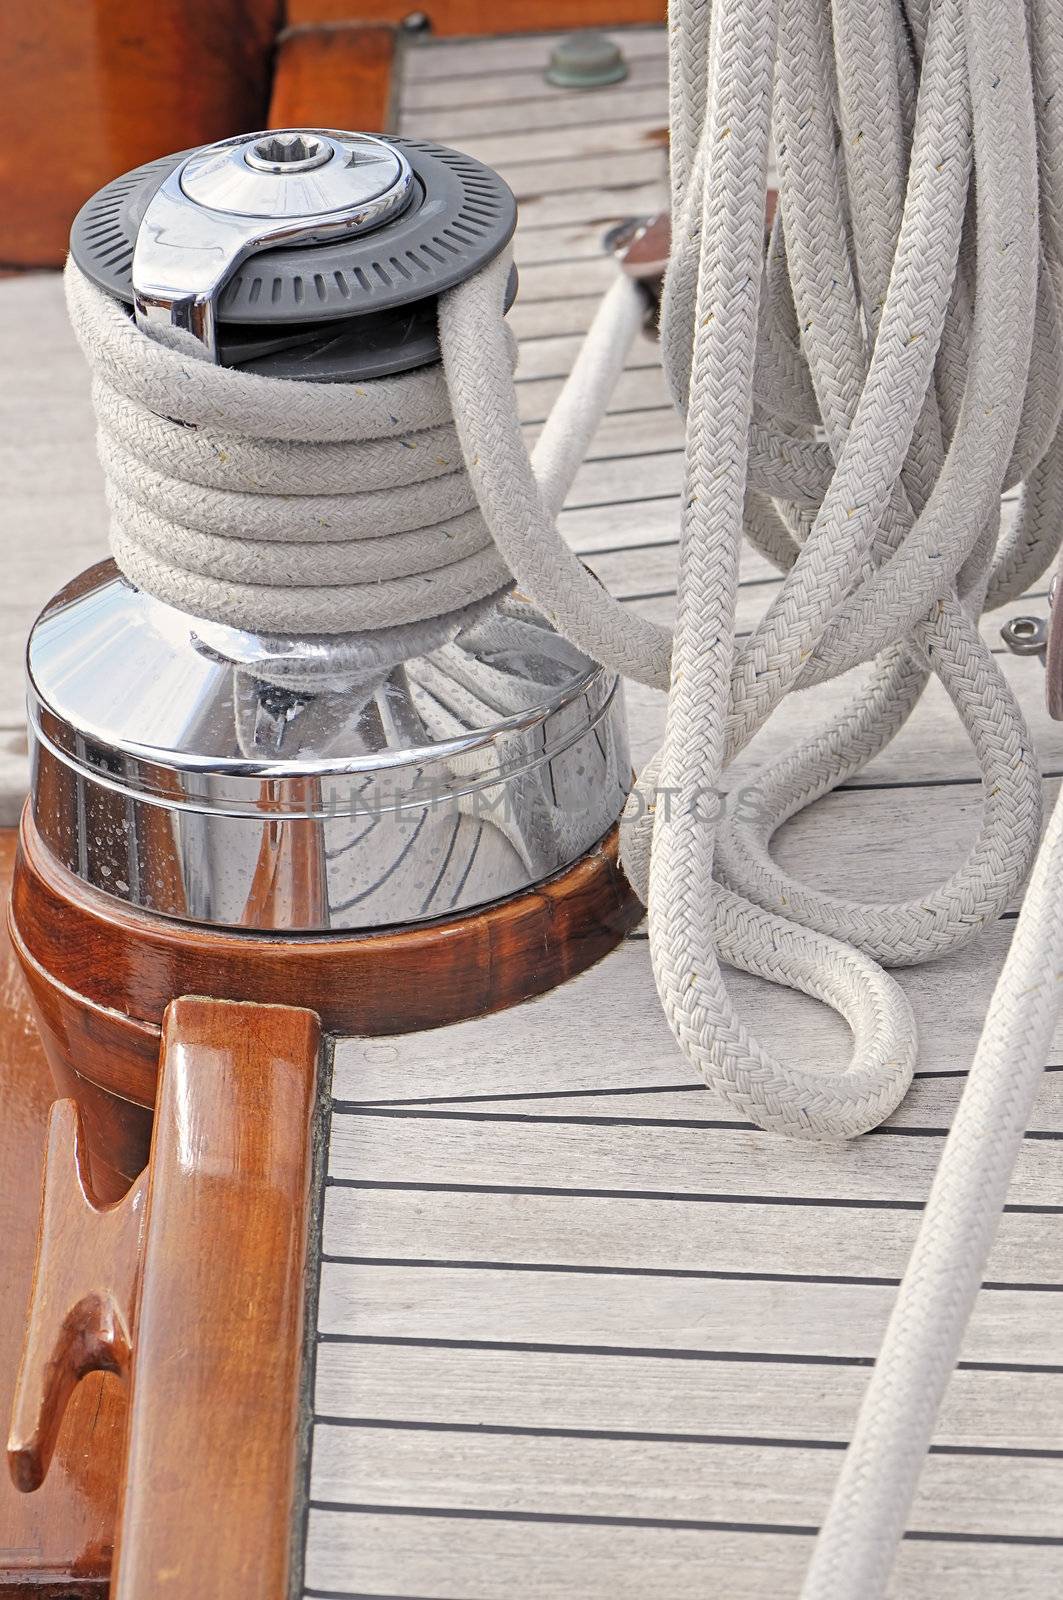 Winch and rope on a wooden sailboat